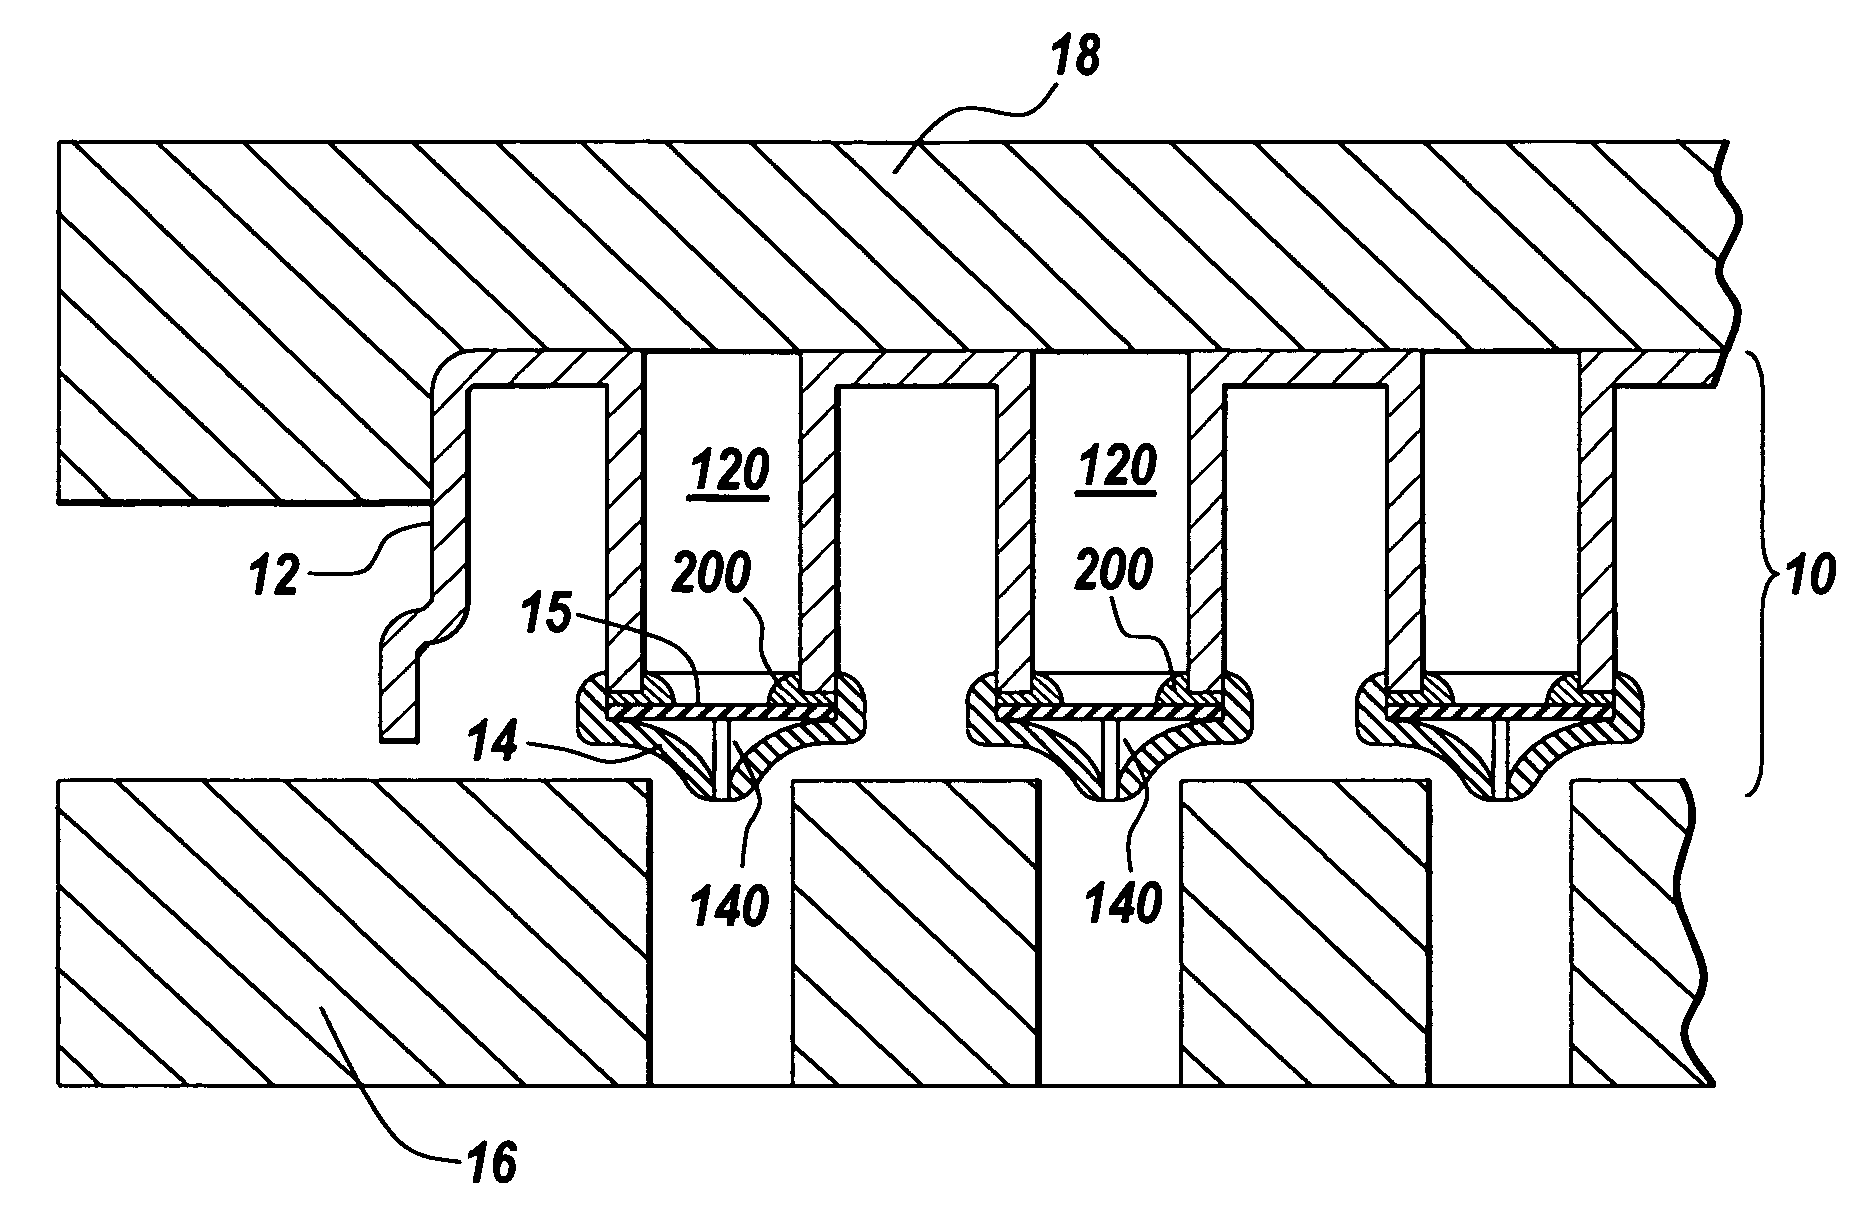 Method of assembling a filtration plate